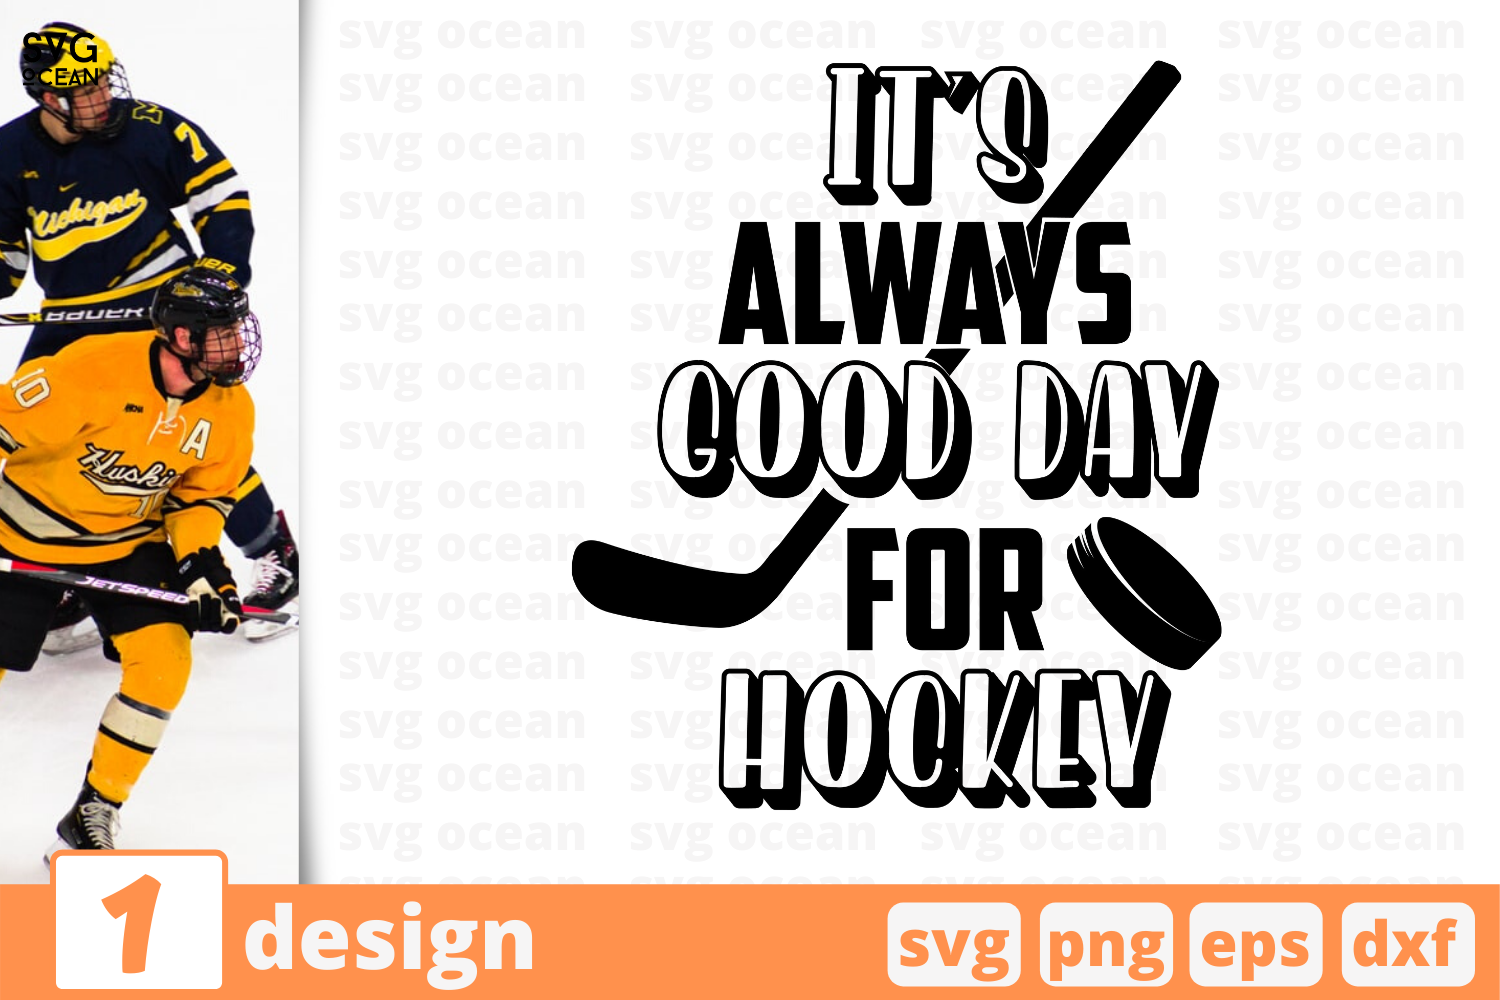 1 IT'S ALWAYS GOOD DAY FOR HOCKEY, sport quotes cricut svg By SvgOcean